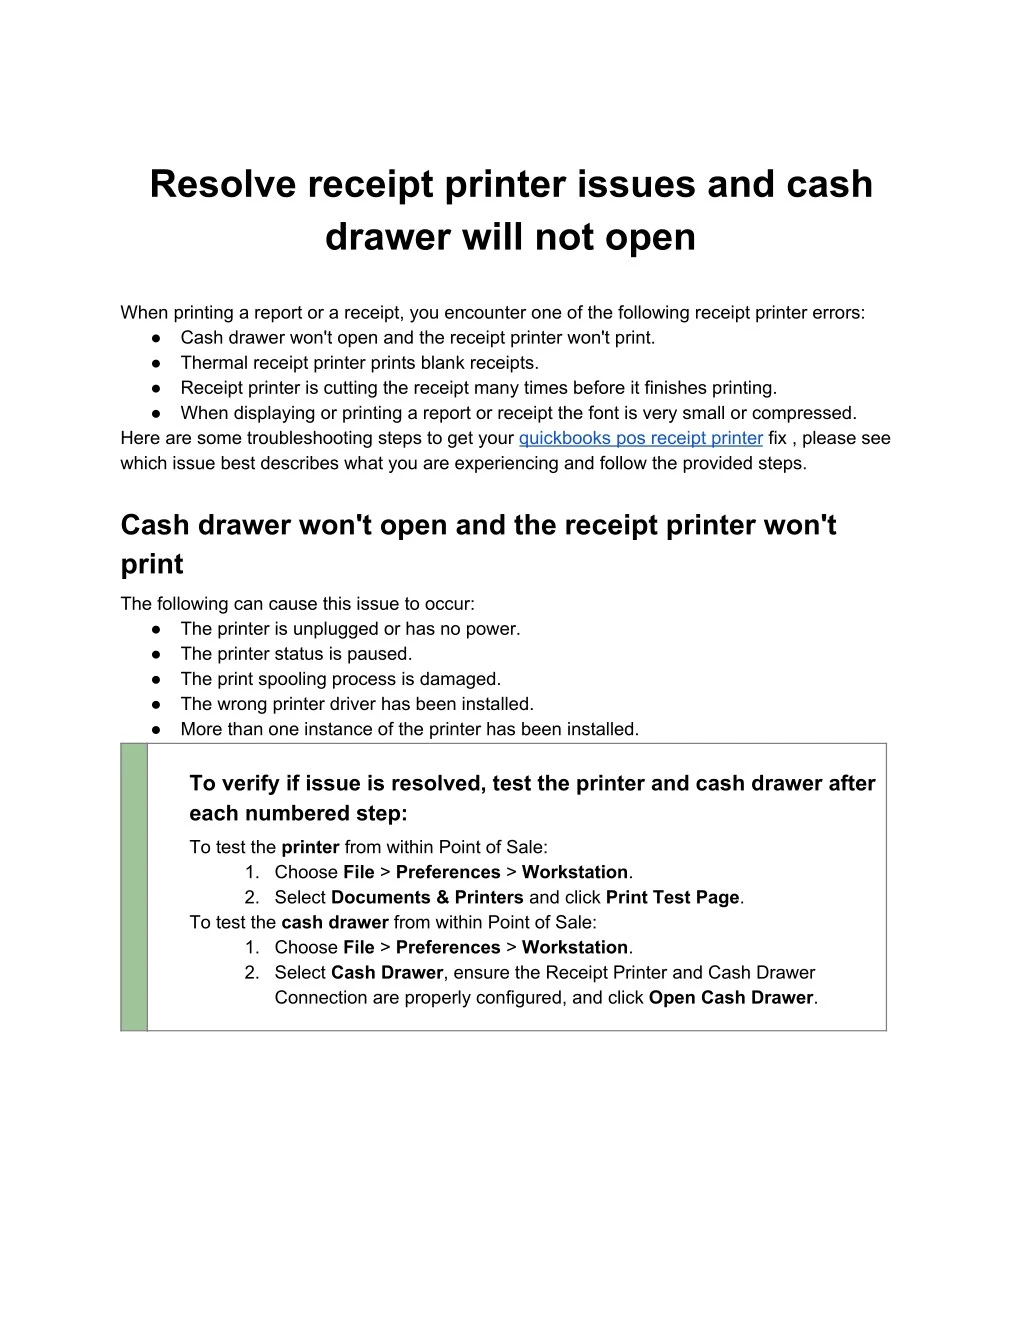 resolve receipt printer issues and cash drawer